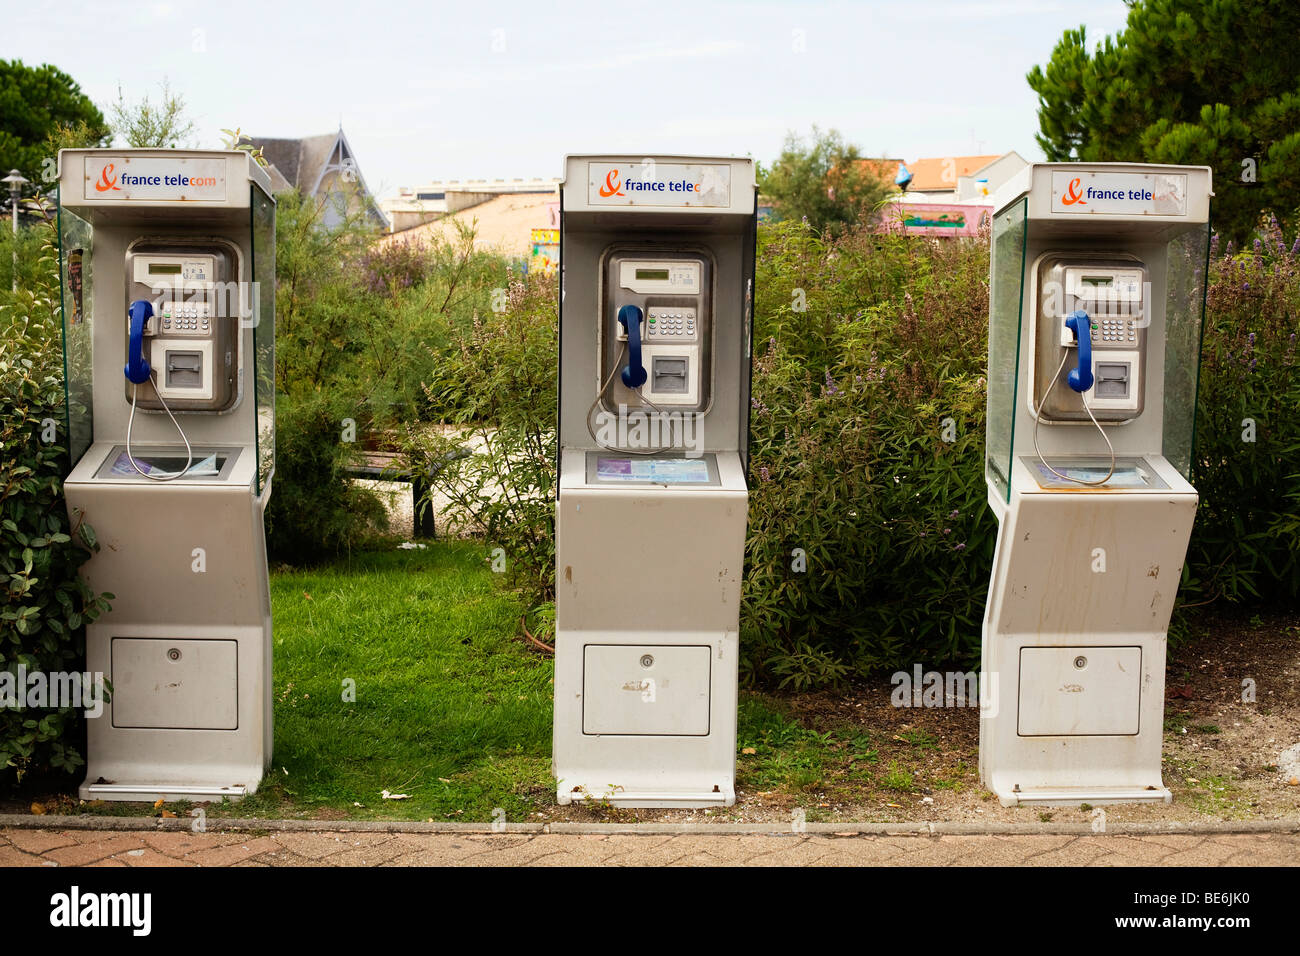 France Telecom public phone boxes in the holiday resort town of Lacanau Ocean on the Atlantic south west coast of France Stock Photo